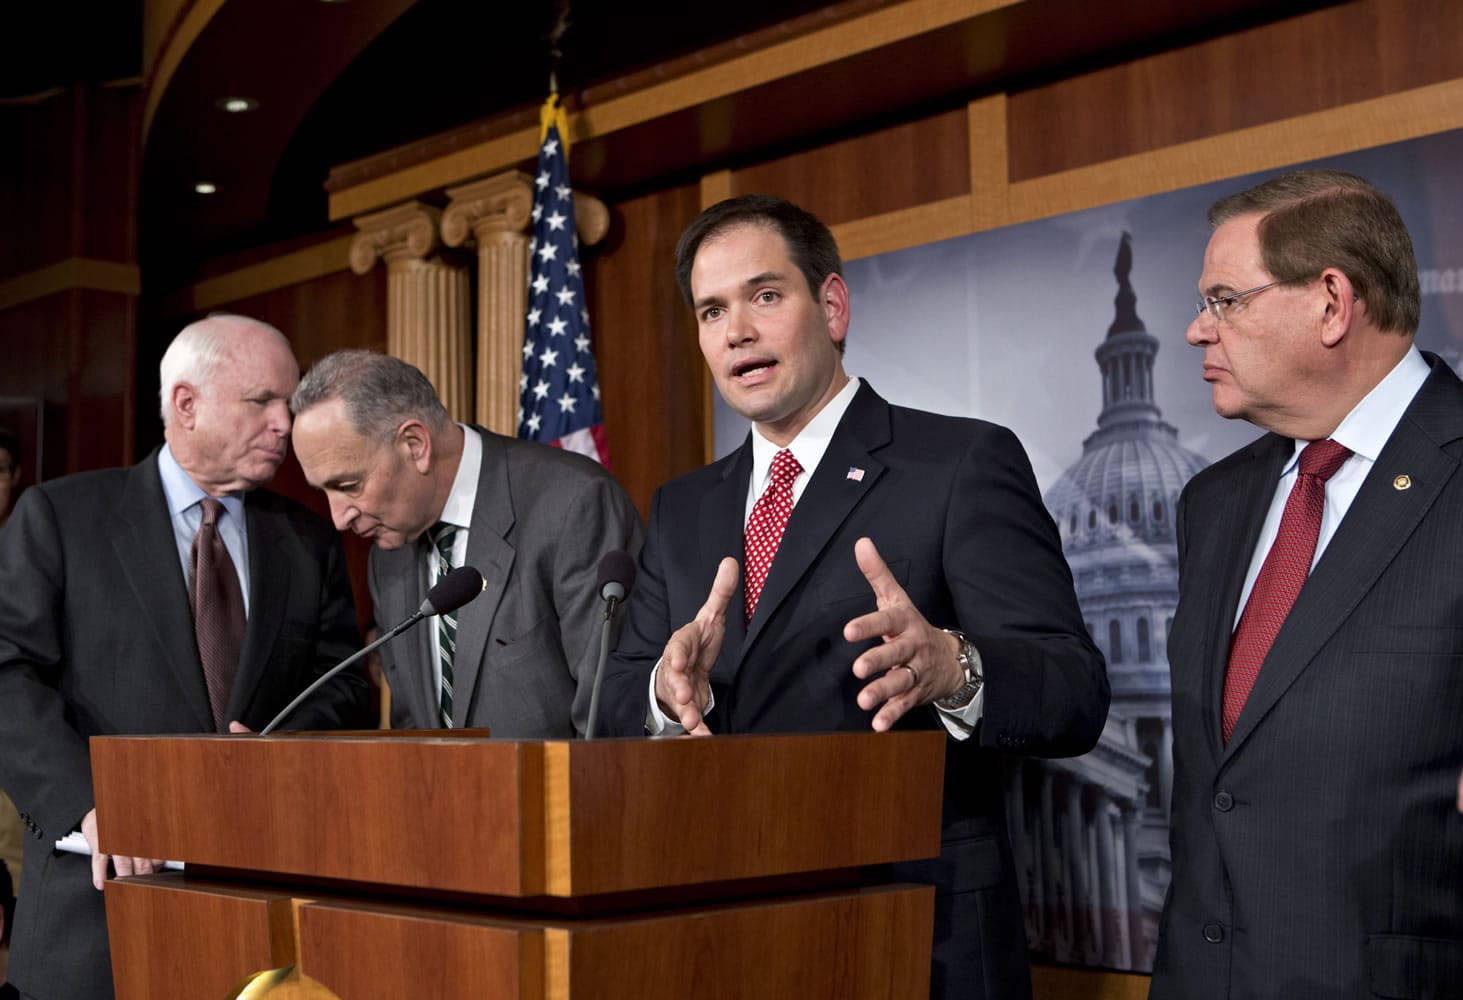 Sen. Marco Rubio, R-Fla., center, speaks at a Capitol Hill news conference on immigration legislation with a members of a bipartisan group of leading senators, including, from left, Sen. John McCain, R-Ariz., Sen. Chuck Schumer, D-N.Y. and Sen.